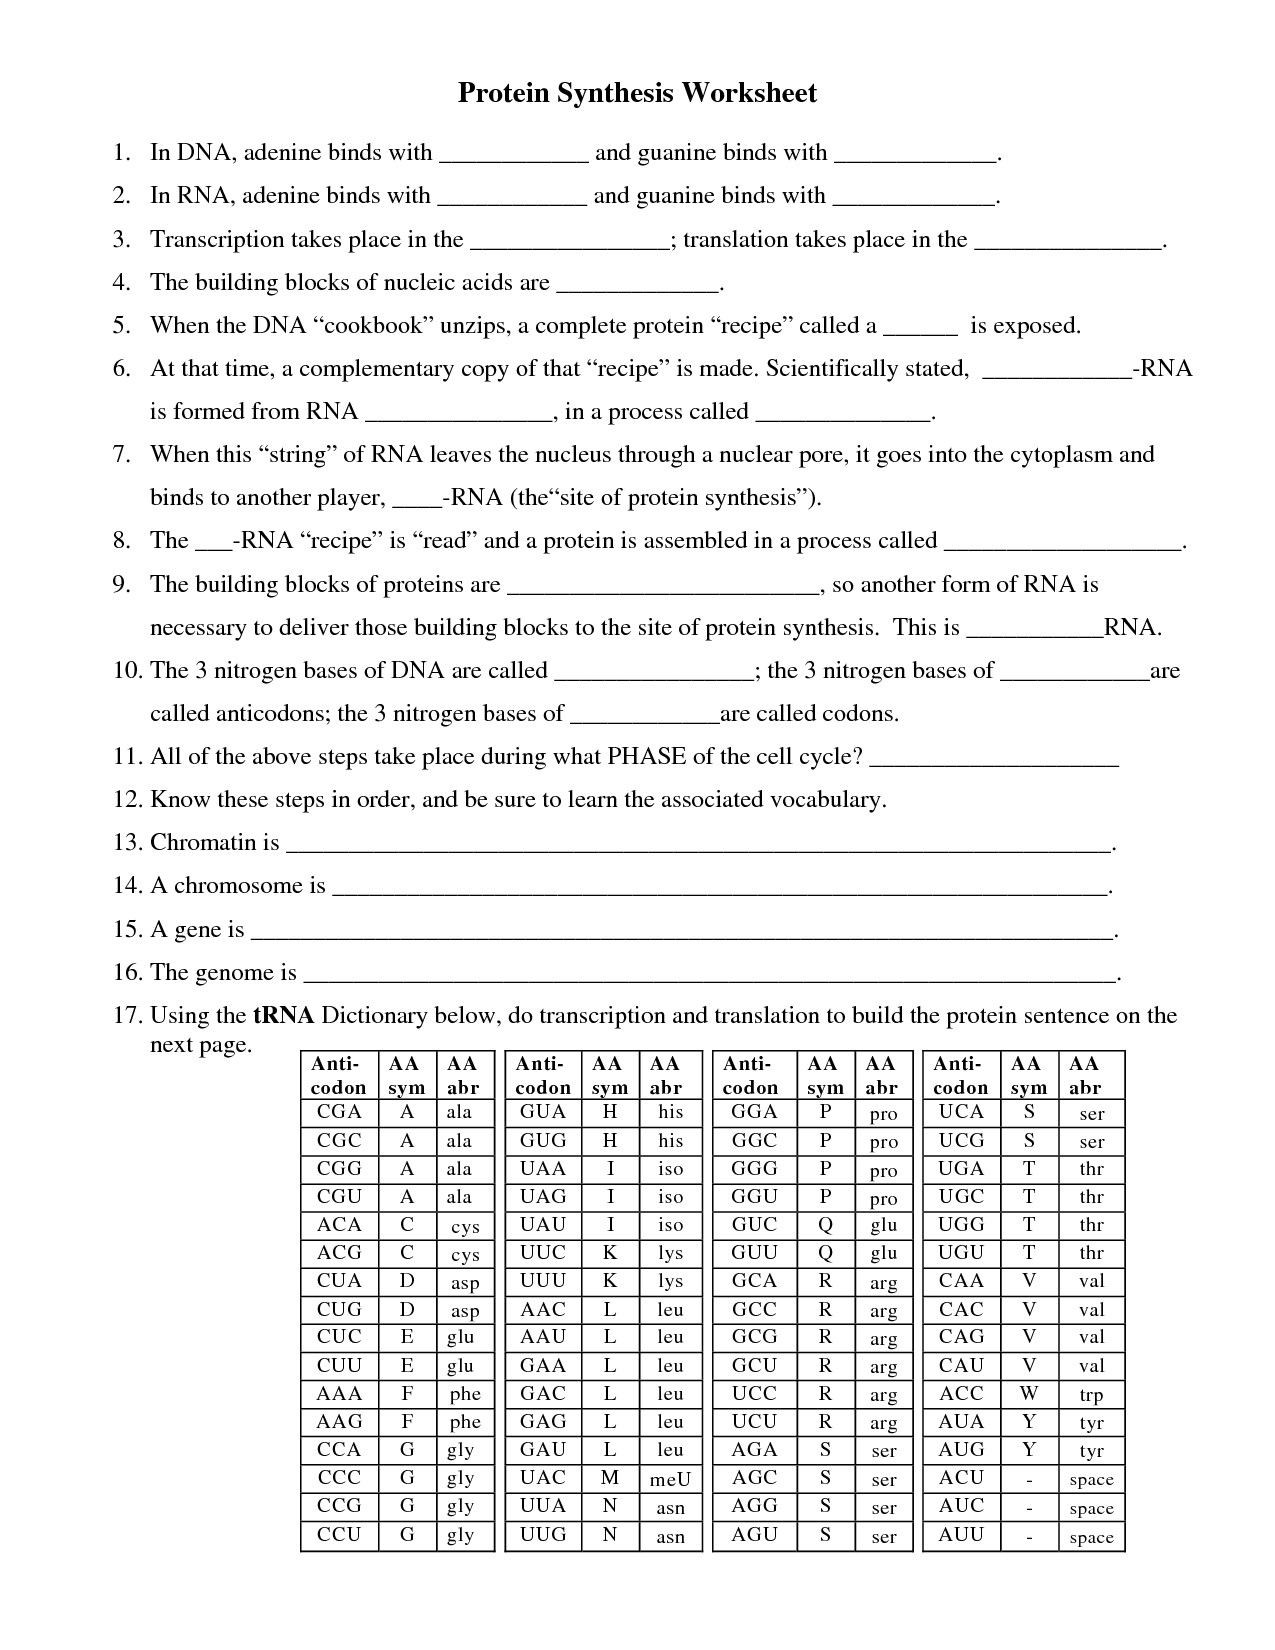 Dna Mutation Practice Worksheet Answers Prime Dna and Protein Synthesis Worksheet Answers